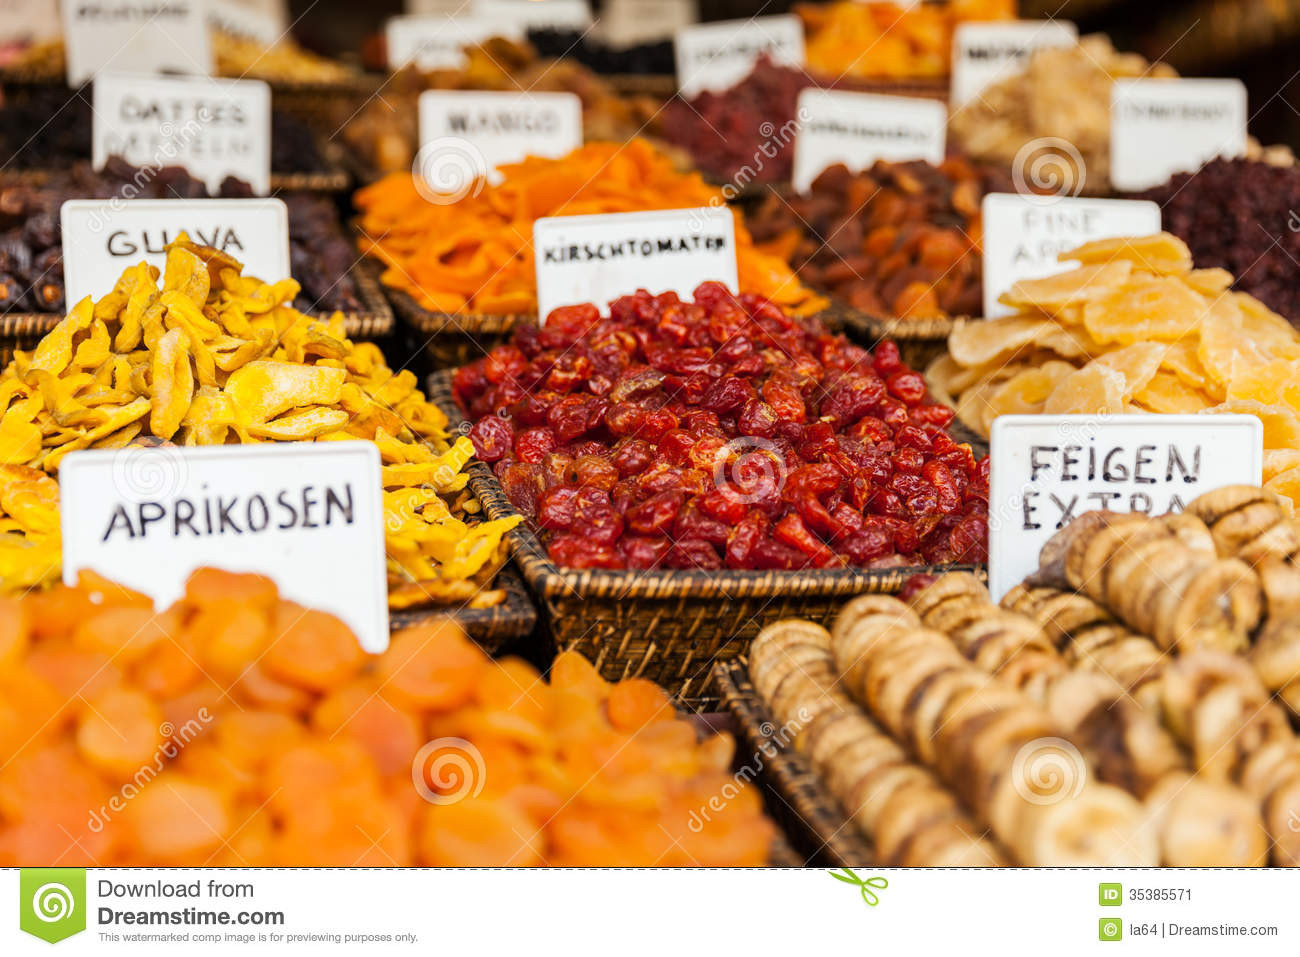 Healthy Dry Snacks
 Healthy Eating Dried Fruit Snack At Food Market Stock